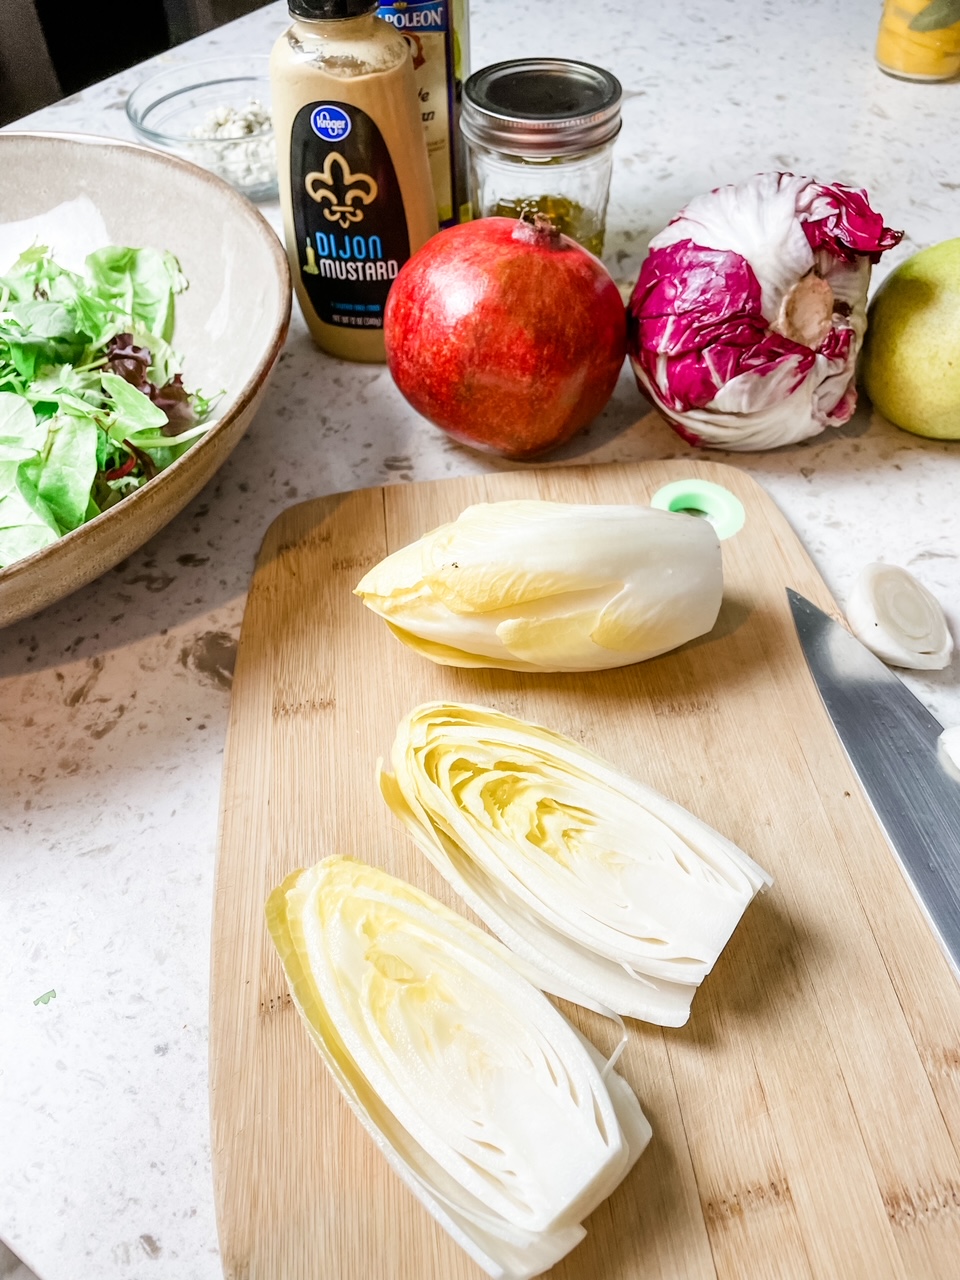 Some of the sliced endives ona wooden cutting board, with a pomegranate behind them